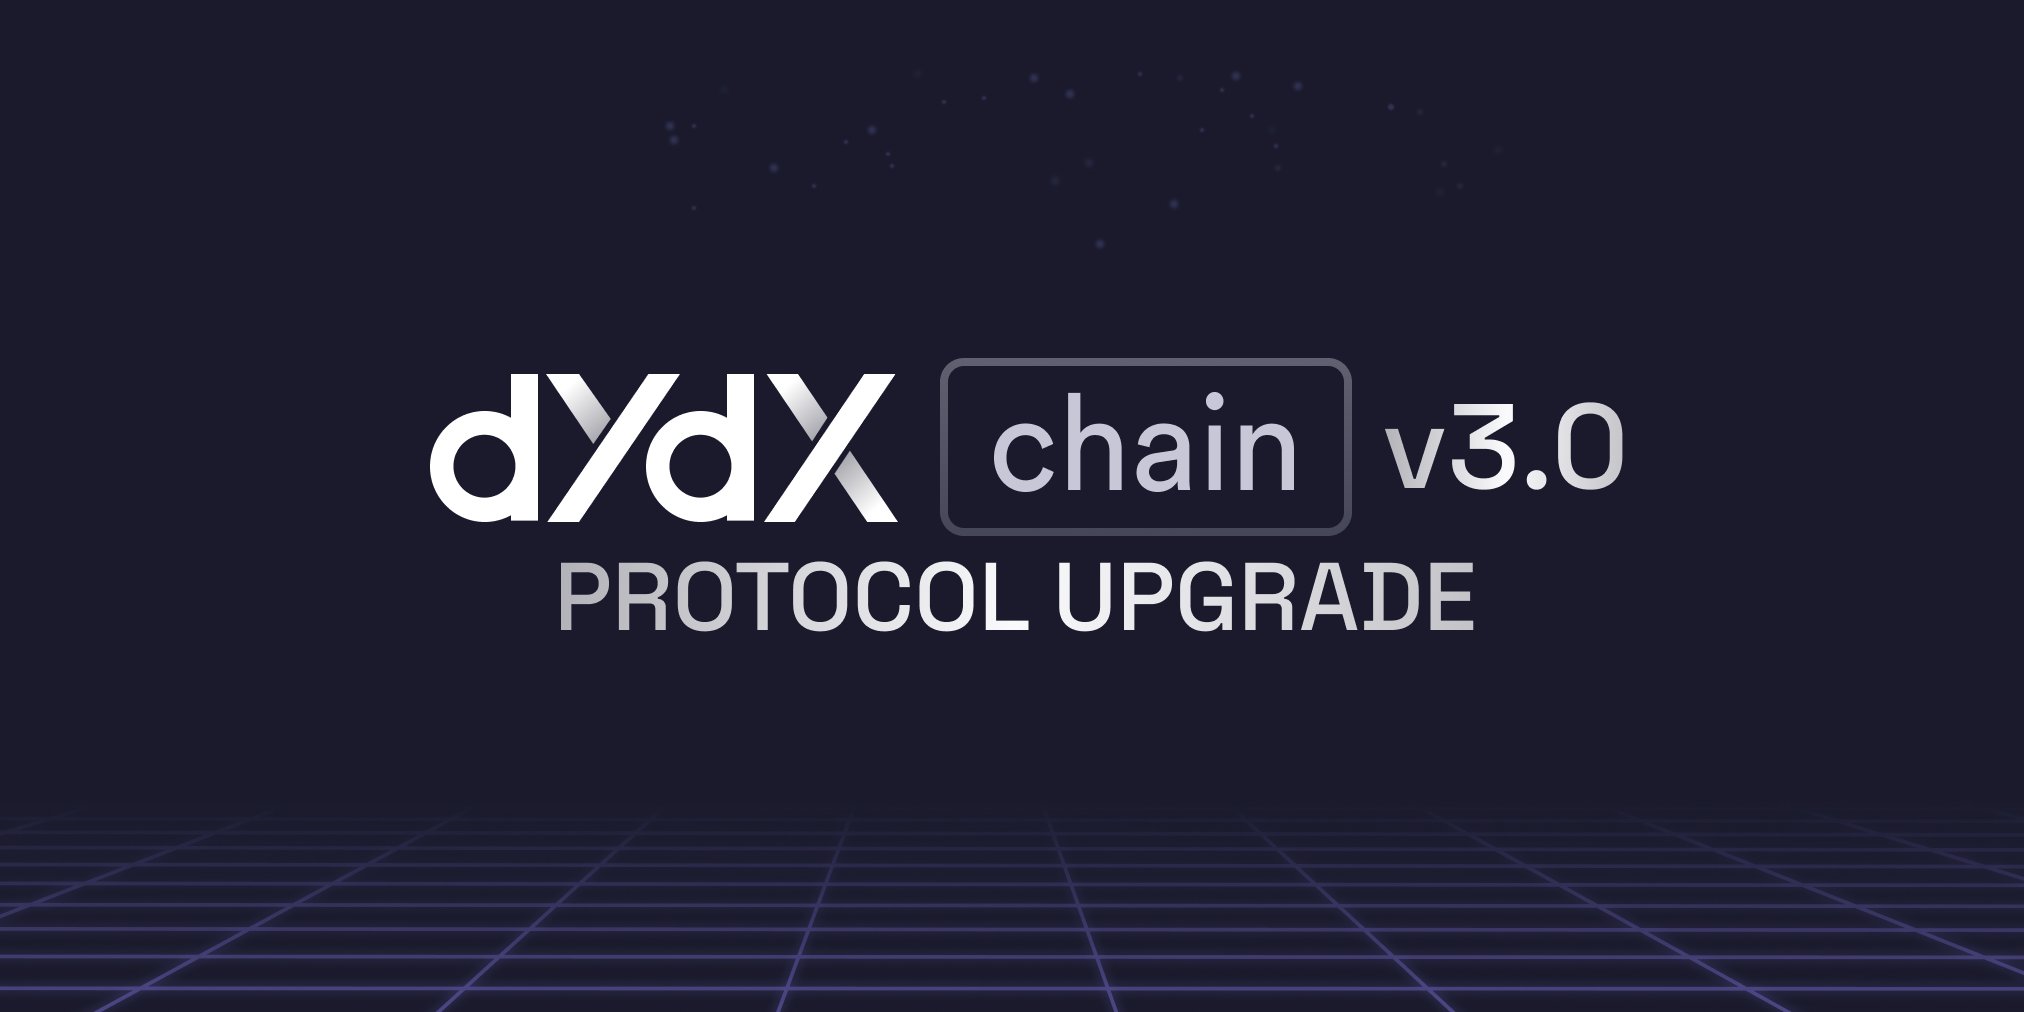 dYdX Chain v3.0: Support for Liquid Staking, Security and Usability Improvements